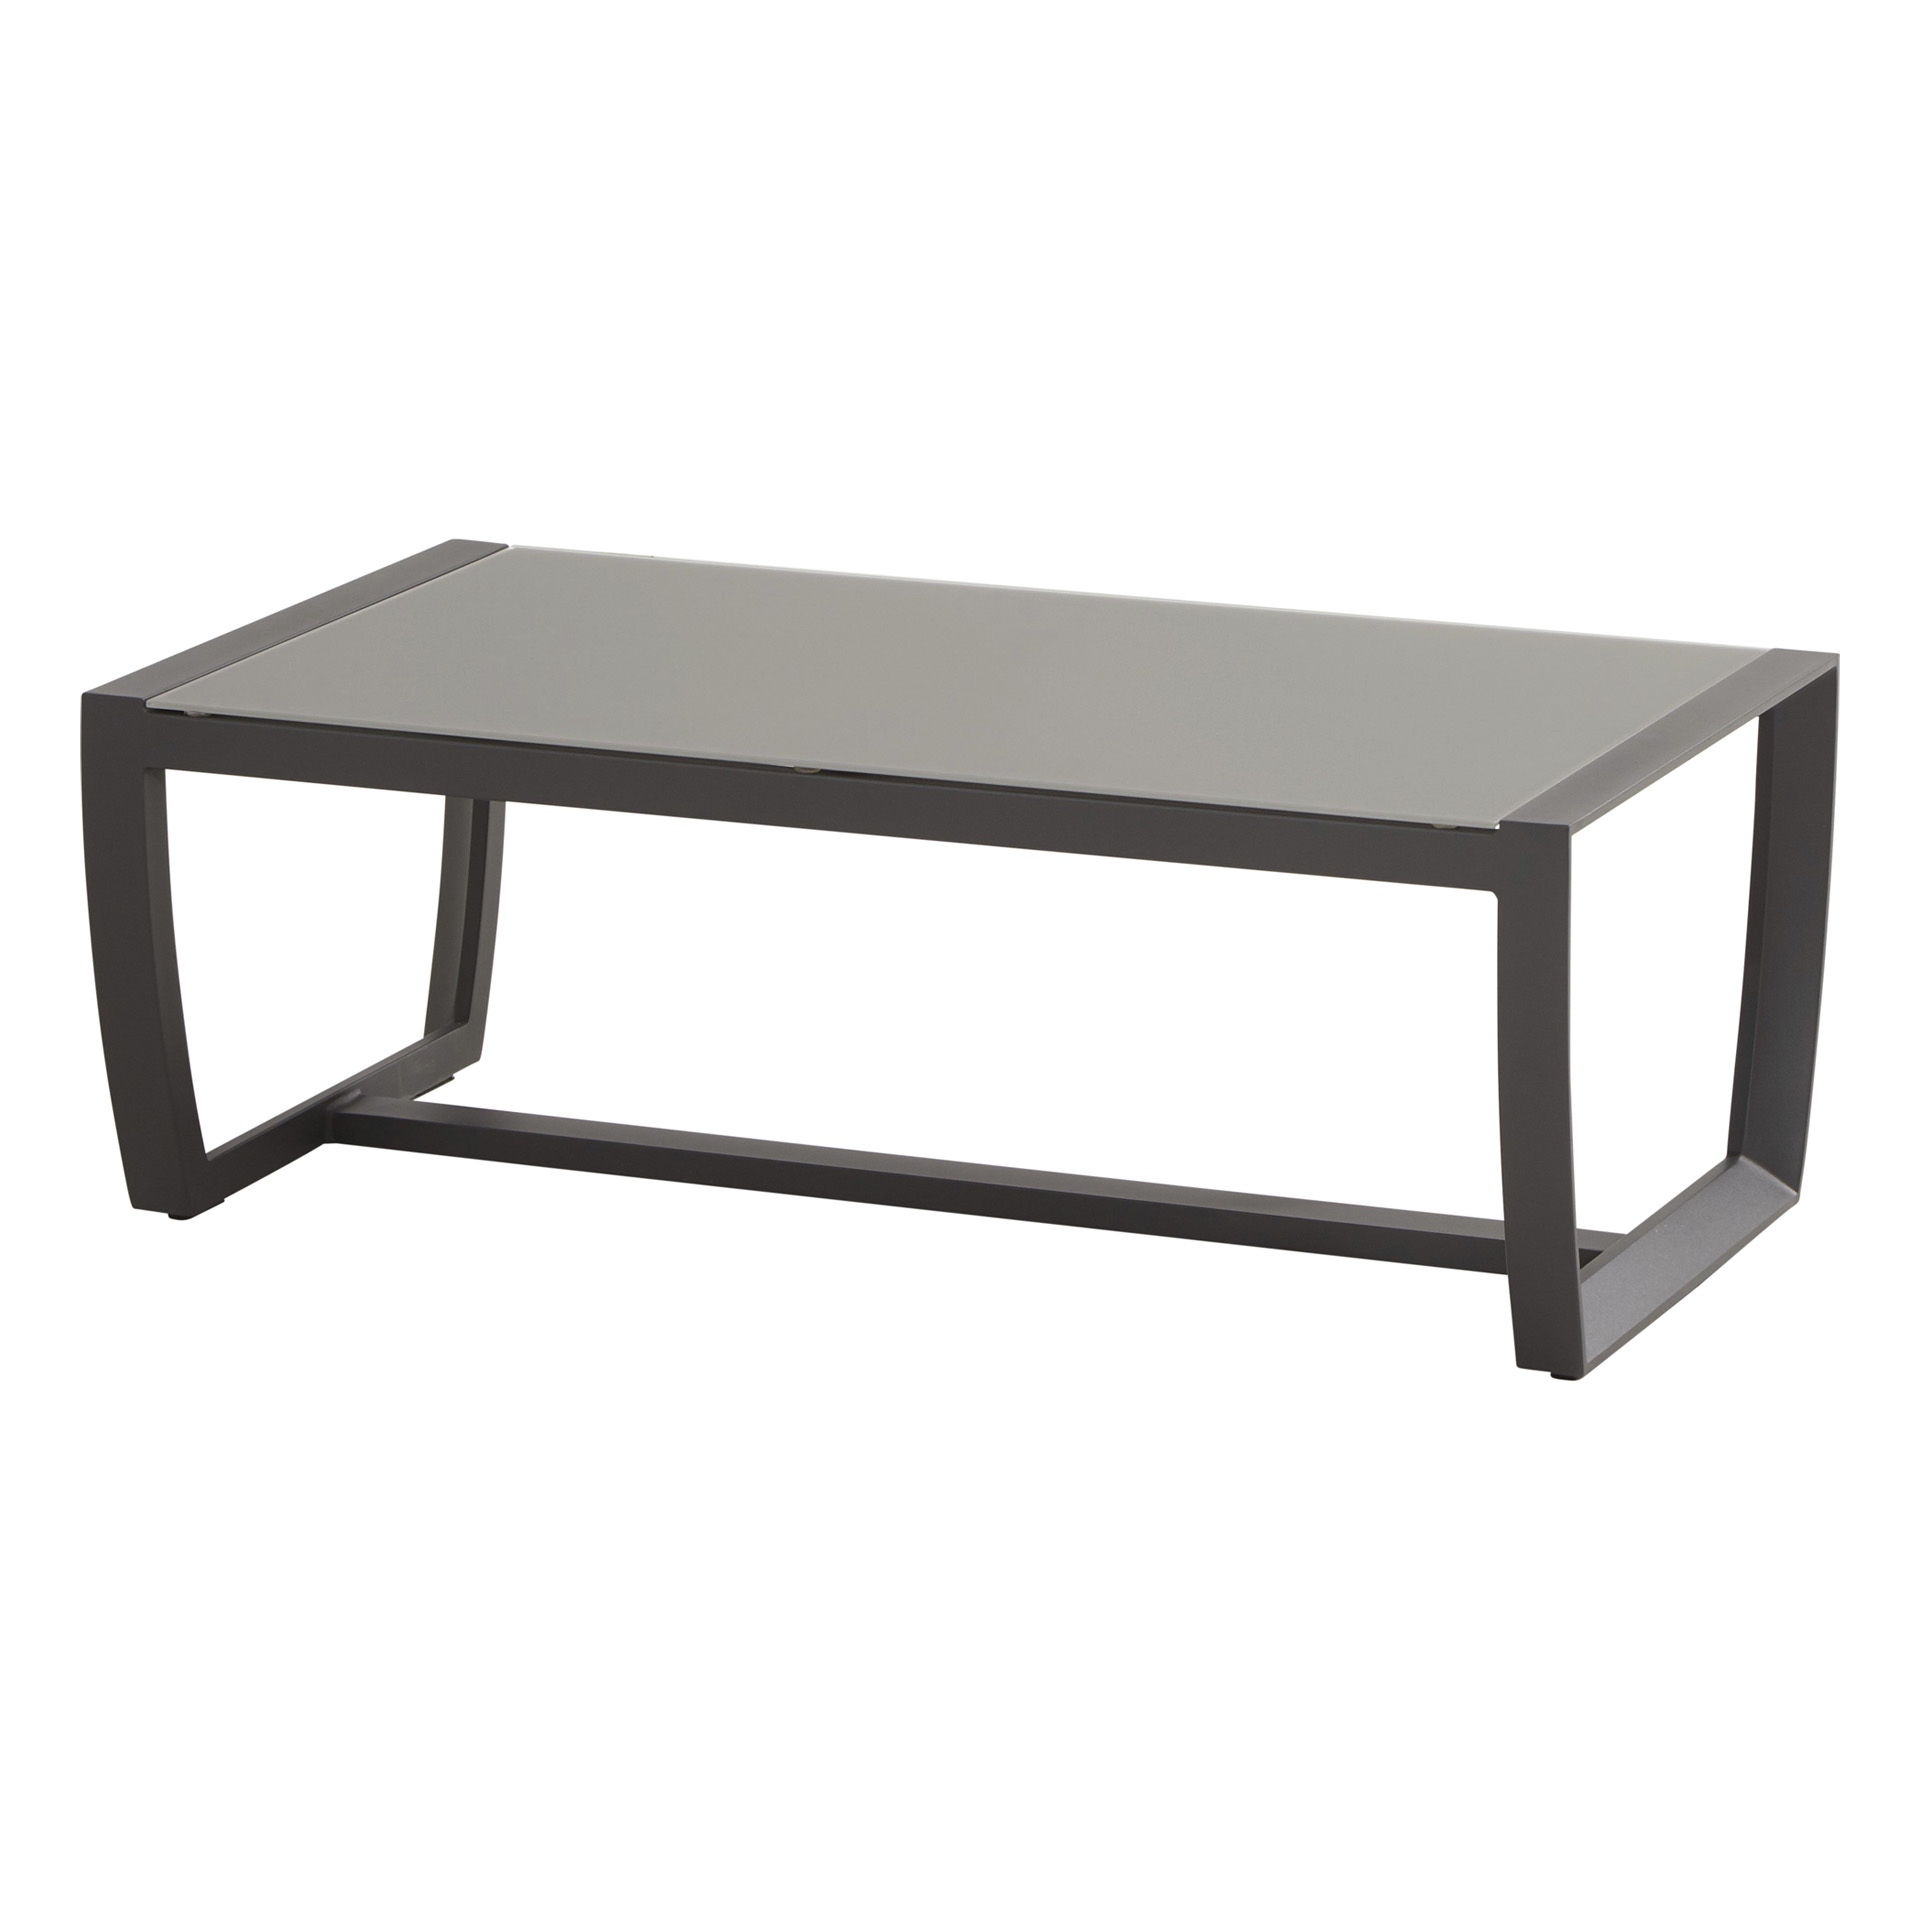 New Mauritius Coffee table Antracite